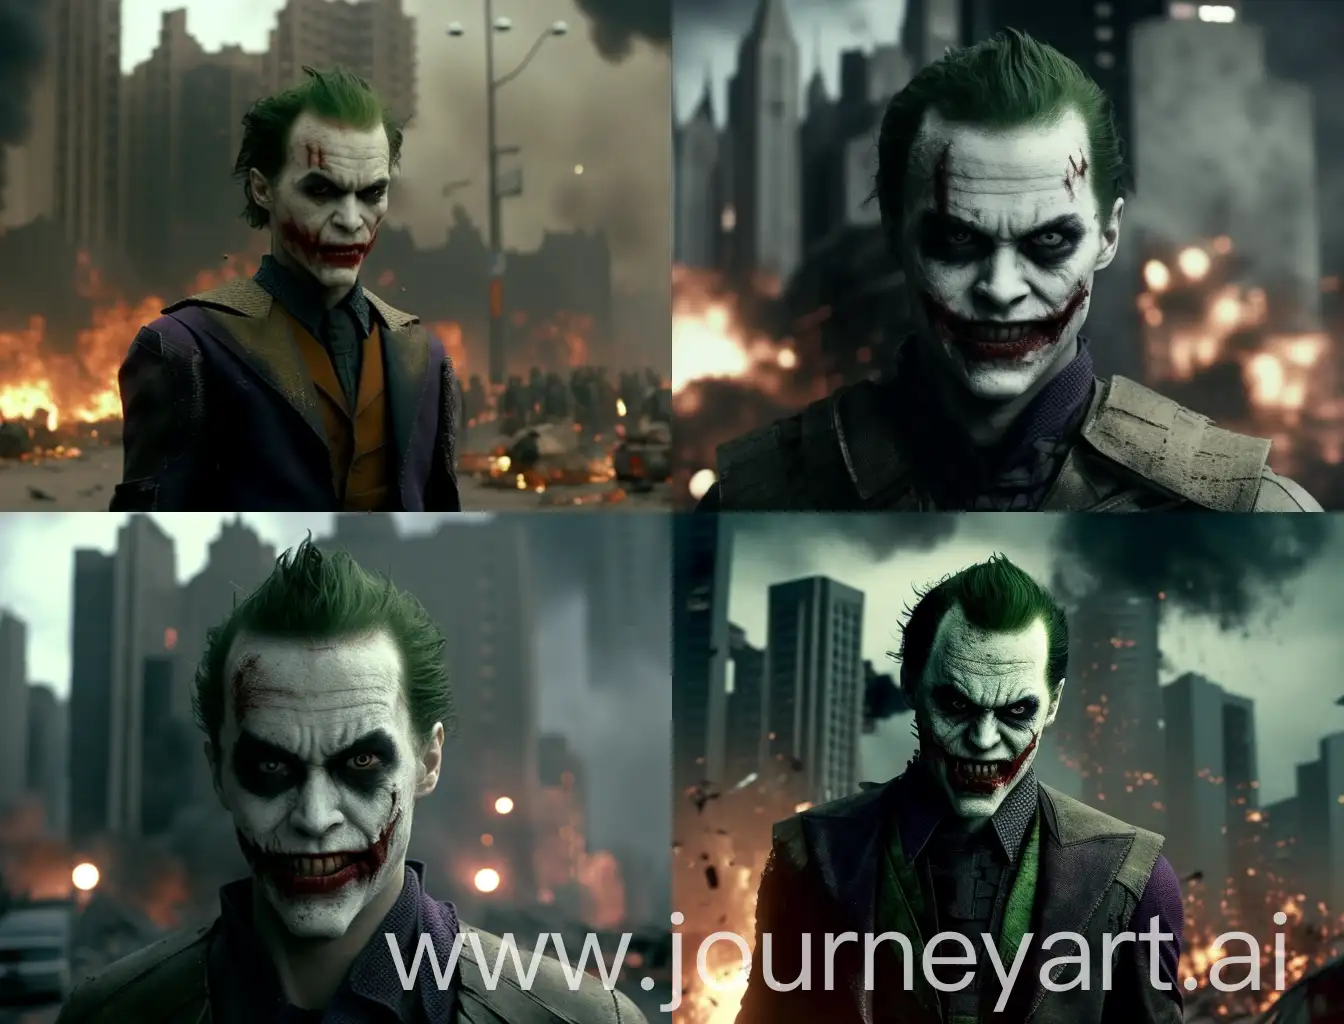 The Joker has a different face and a zombie-like face, facing the camera and half of his body is visible, his facial makeup is mixed and spread, and he looks at the camera with a strange smile, behind that is a destroyed city with destroyed and destroyed buildings and fire. It is taken along with a lot of horrible zombies that are wandering around, cinematic mode, the joker is standing almost away from the camera and half of his body is completely visible and the position of those zombies is completely clear.